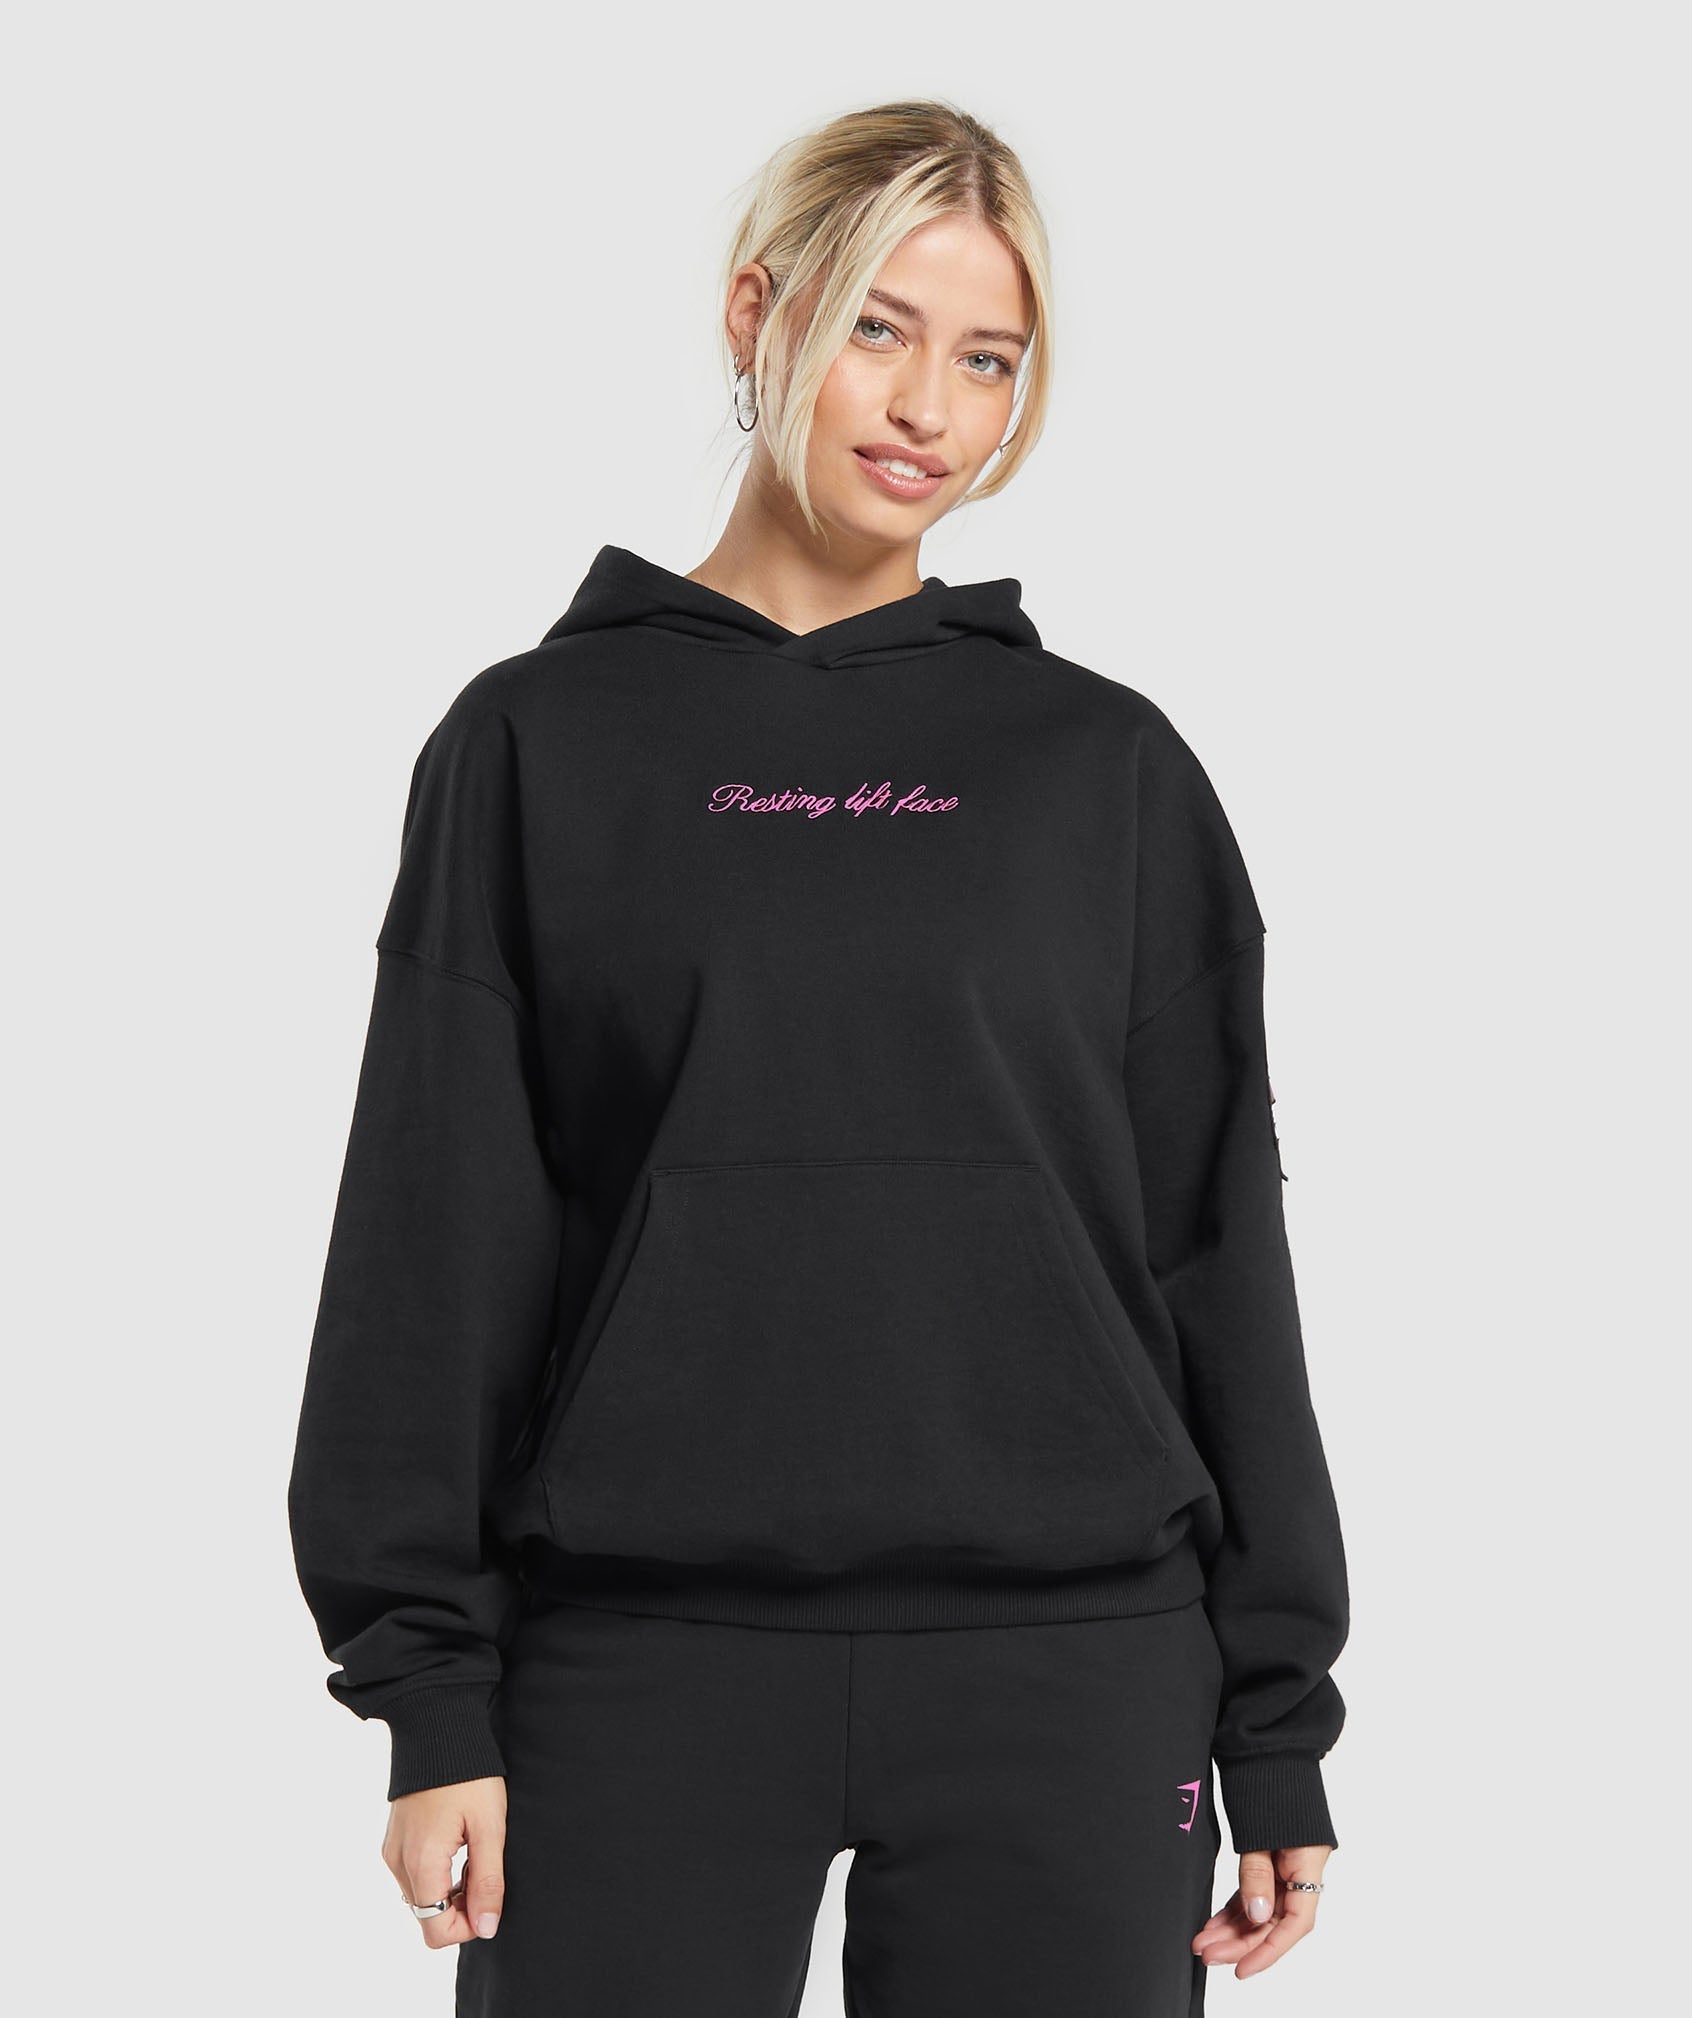 Women's Hoodies - With You From Warm Up to Cool Down